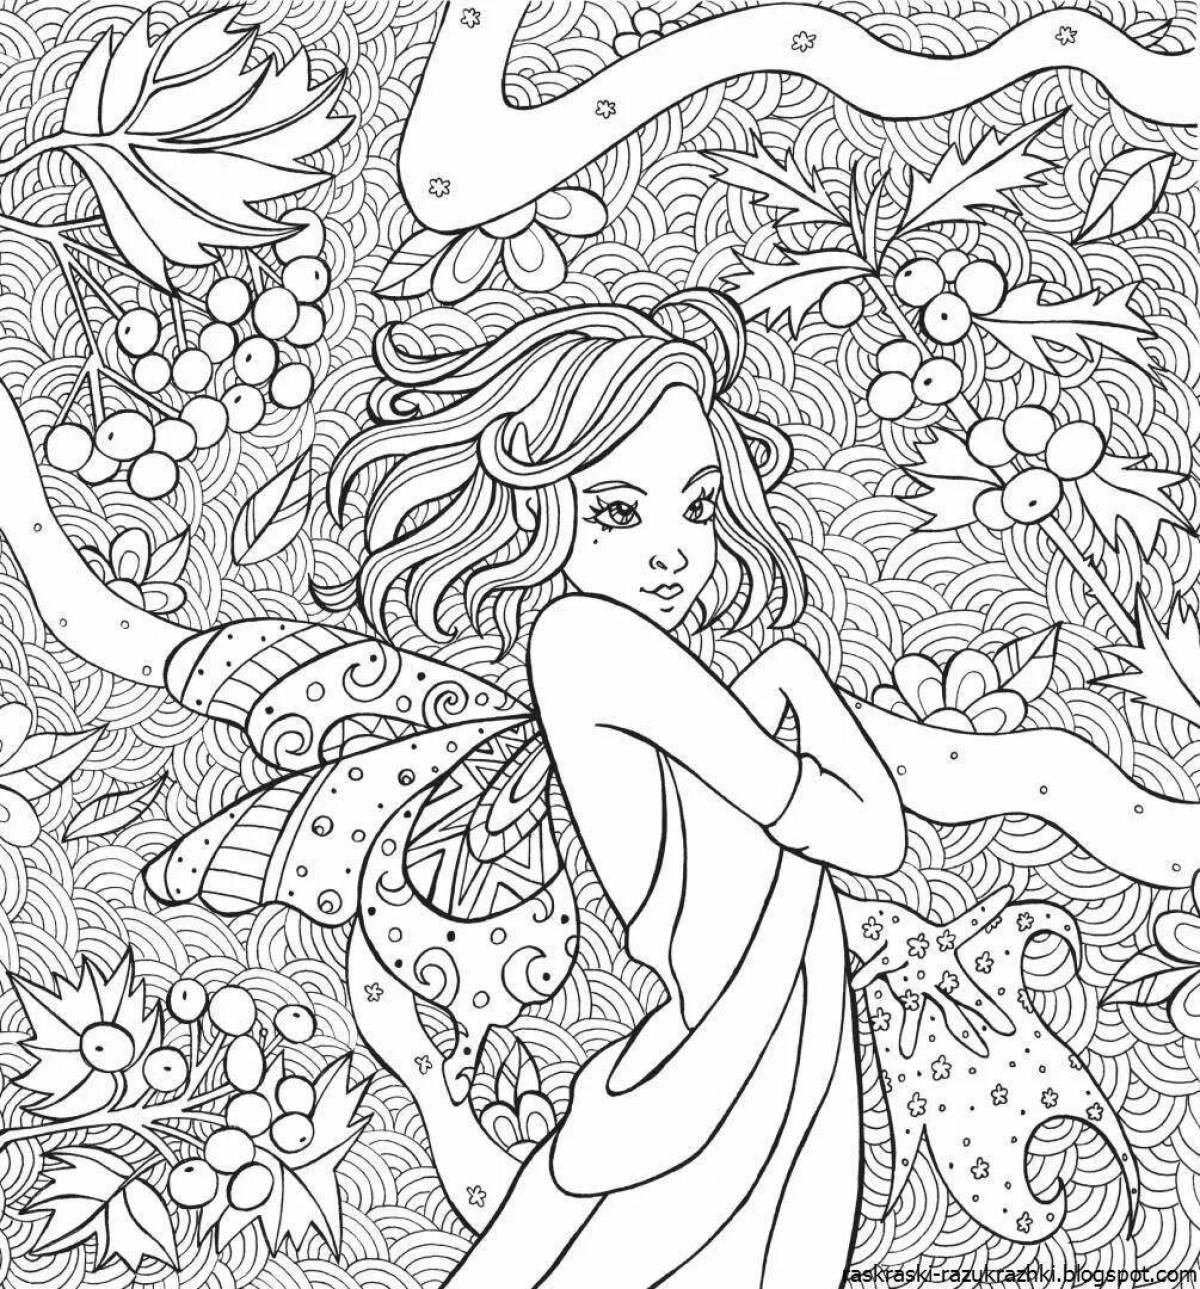 Fun coloring book for 11-13 year olds